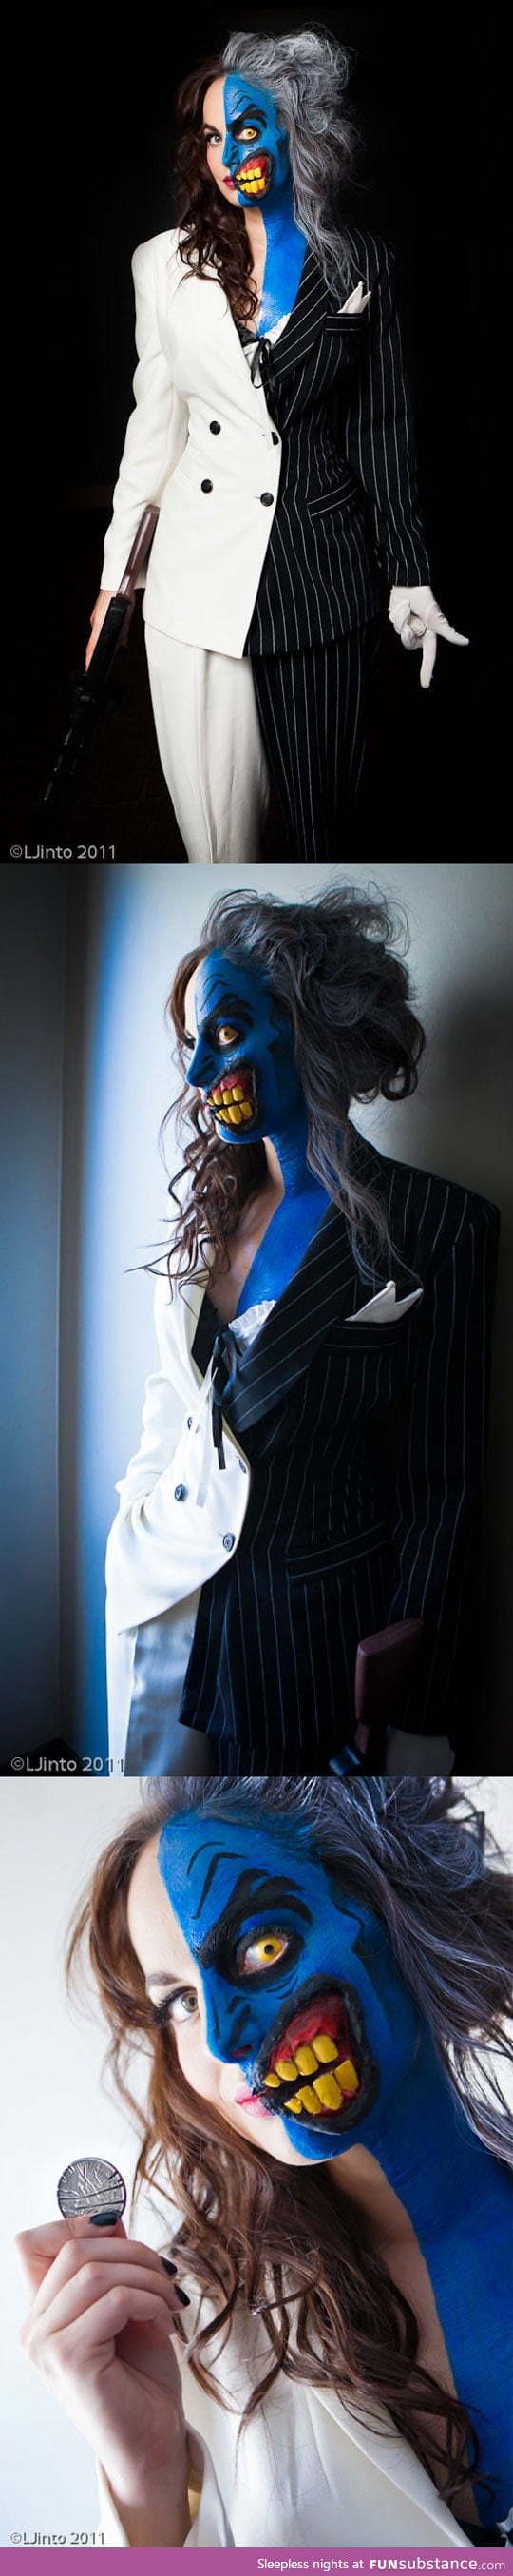 This two-face costume is brilliant